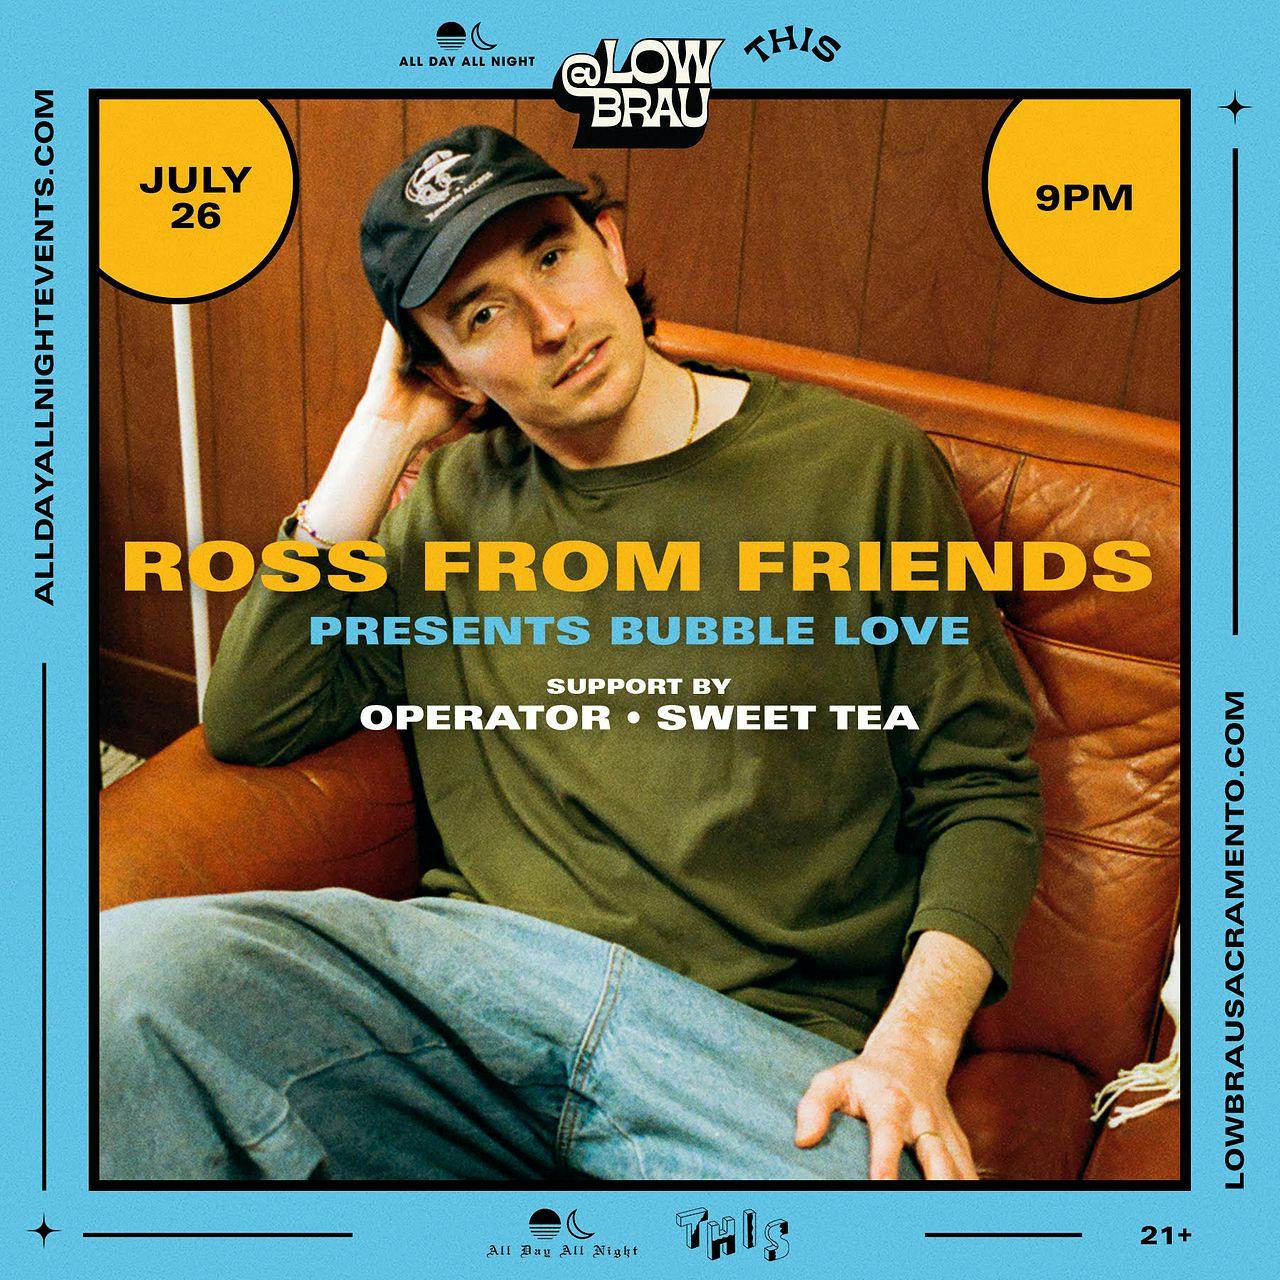 Ross From Friends at LowBrau